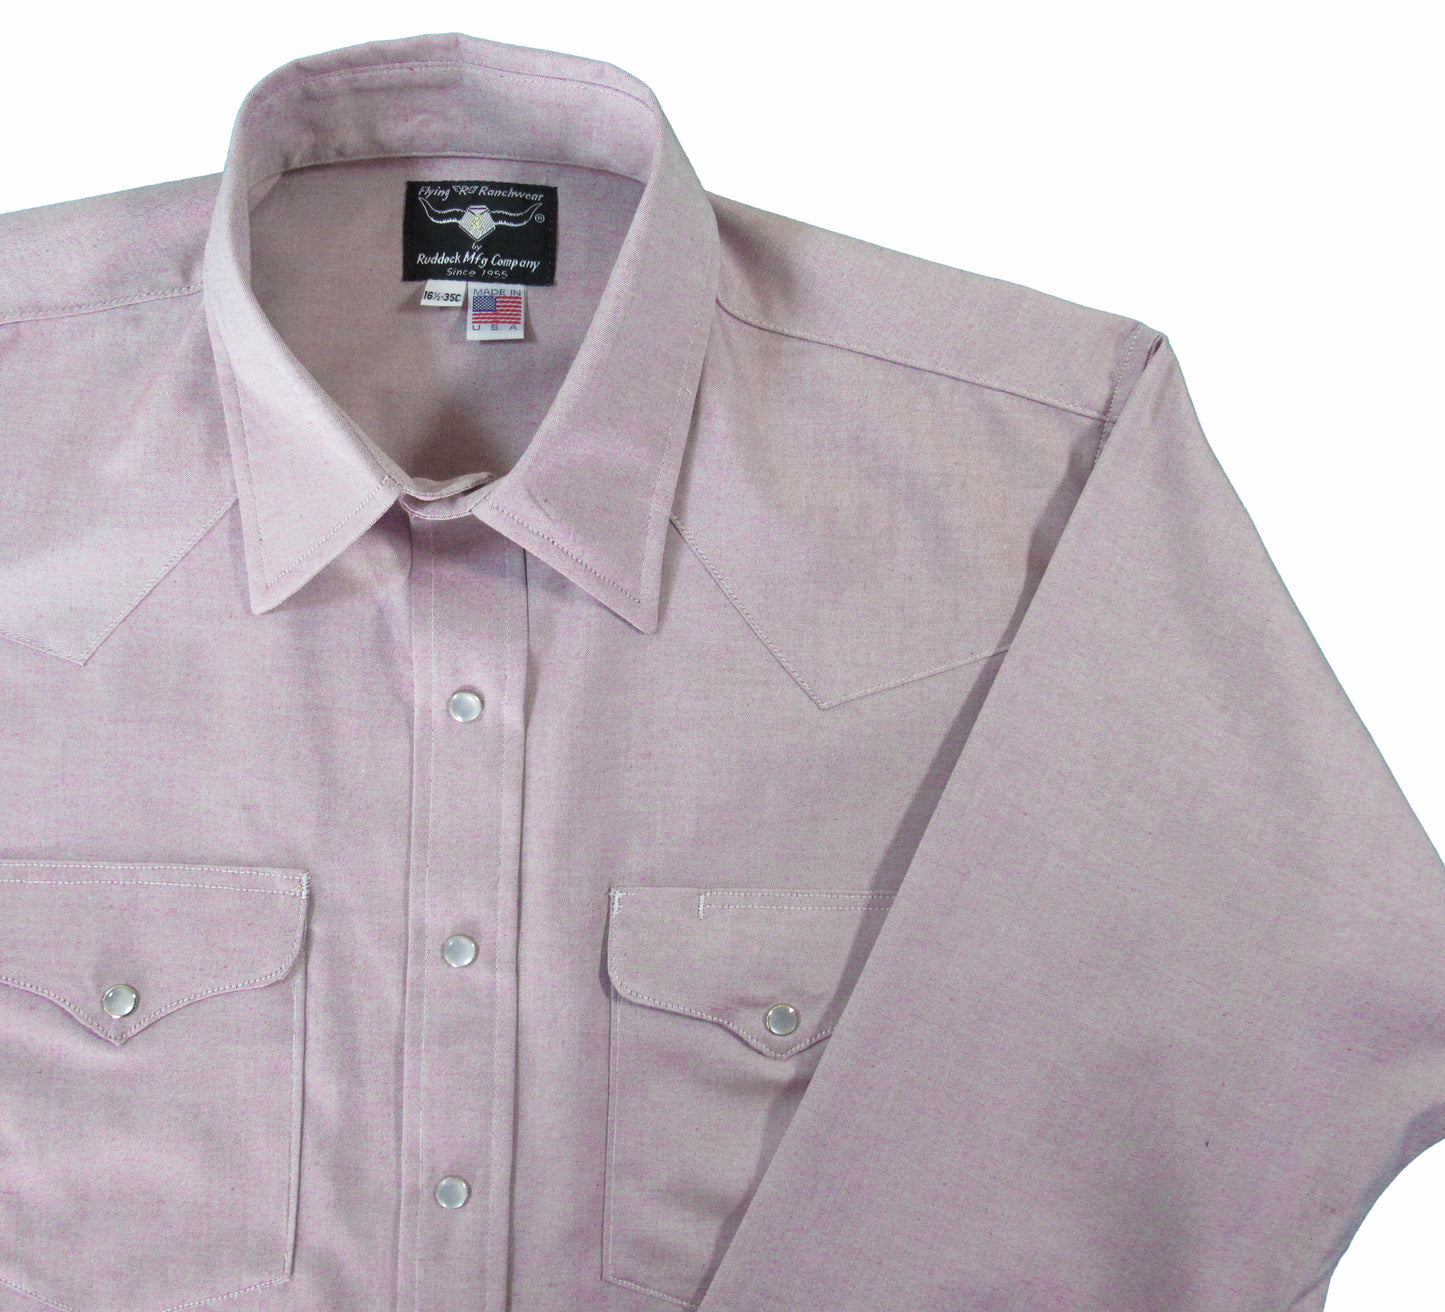 Flying R Ranchwear - Primo Pinpoint Oxford - Grape - Long Sleeve